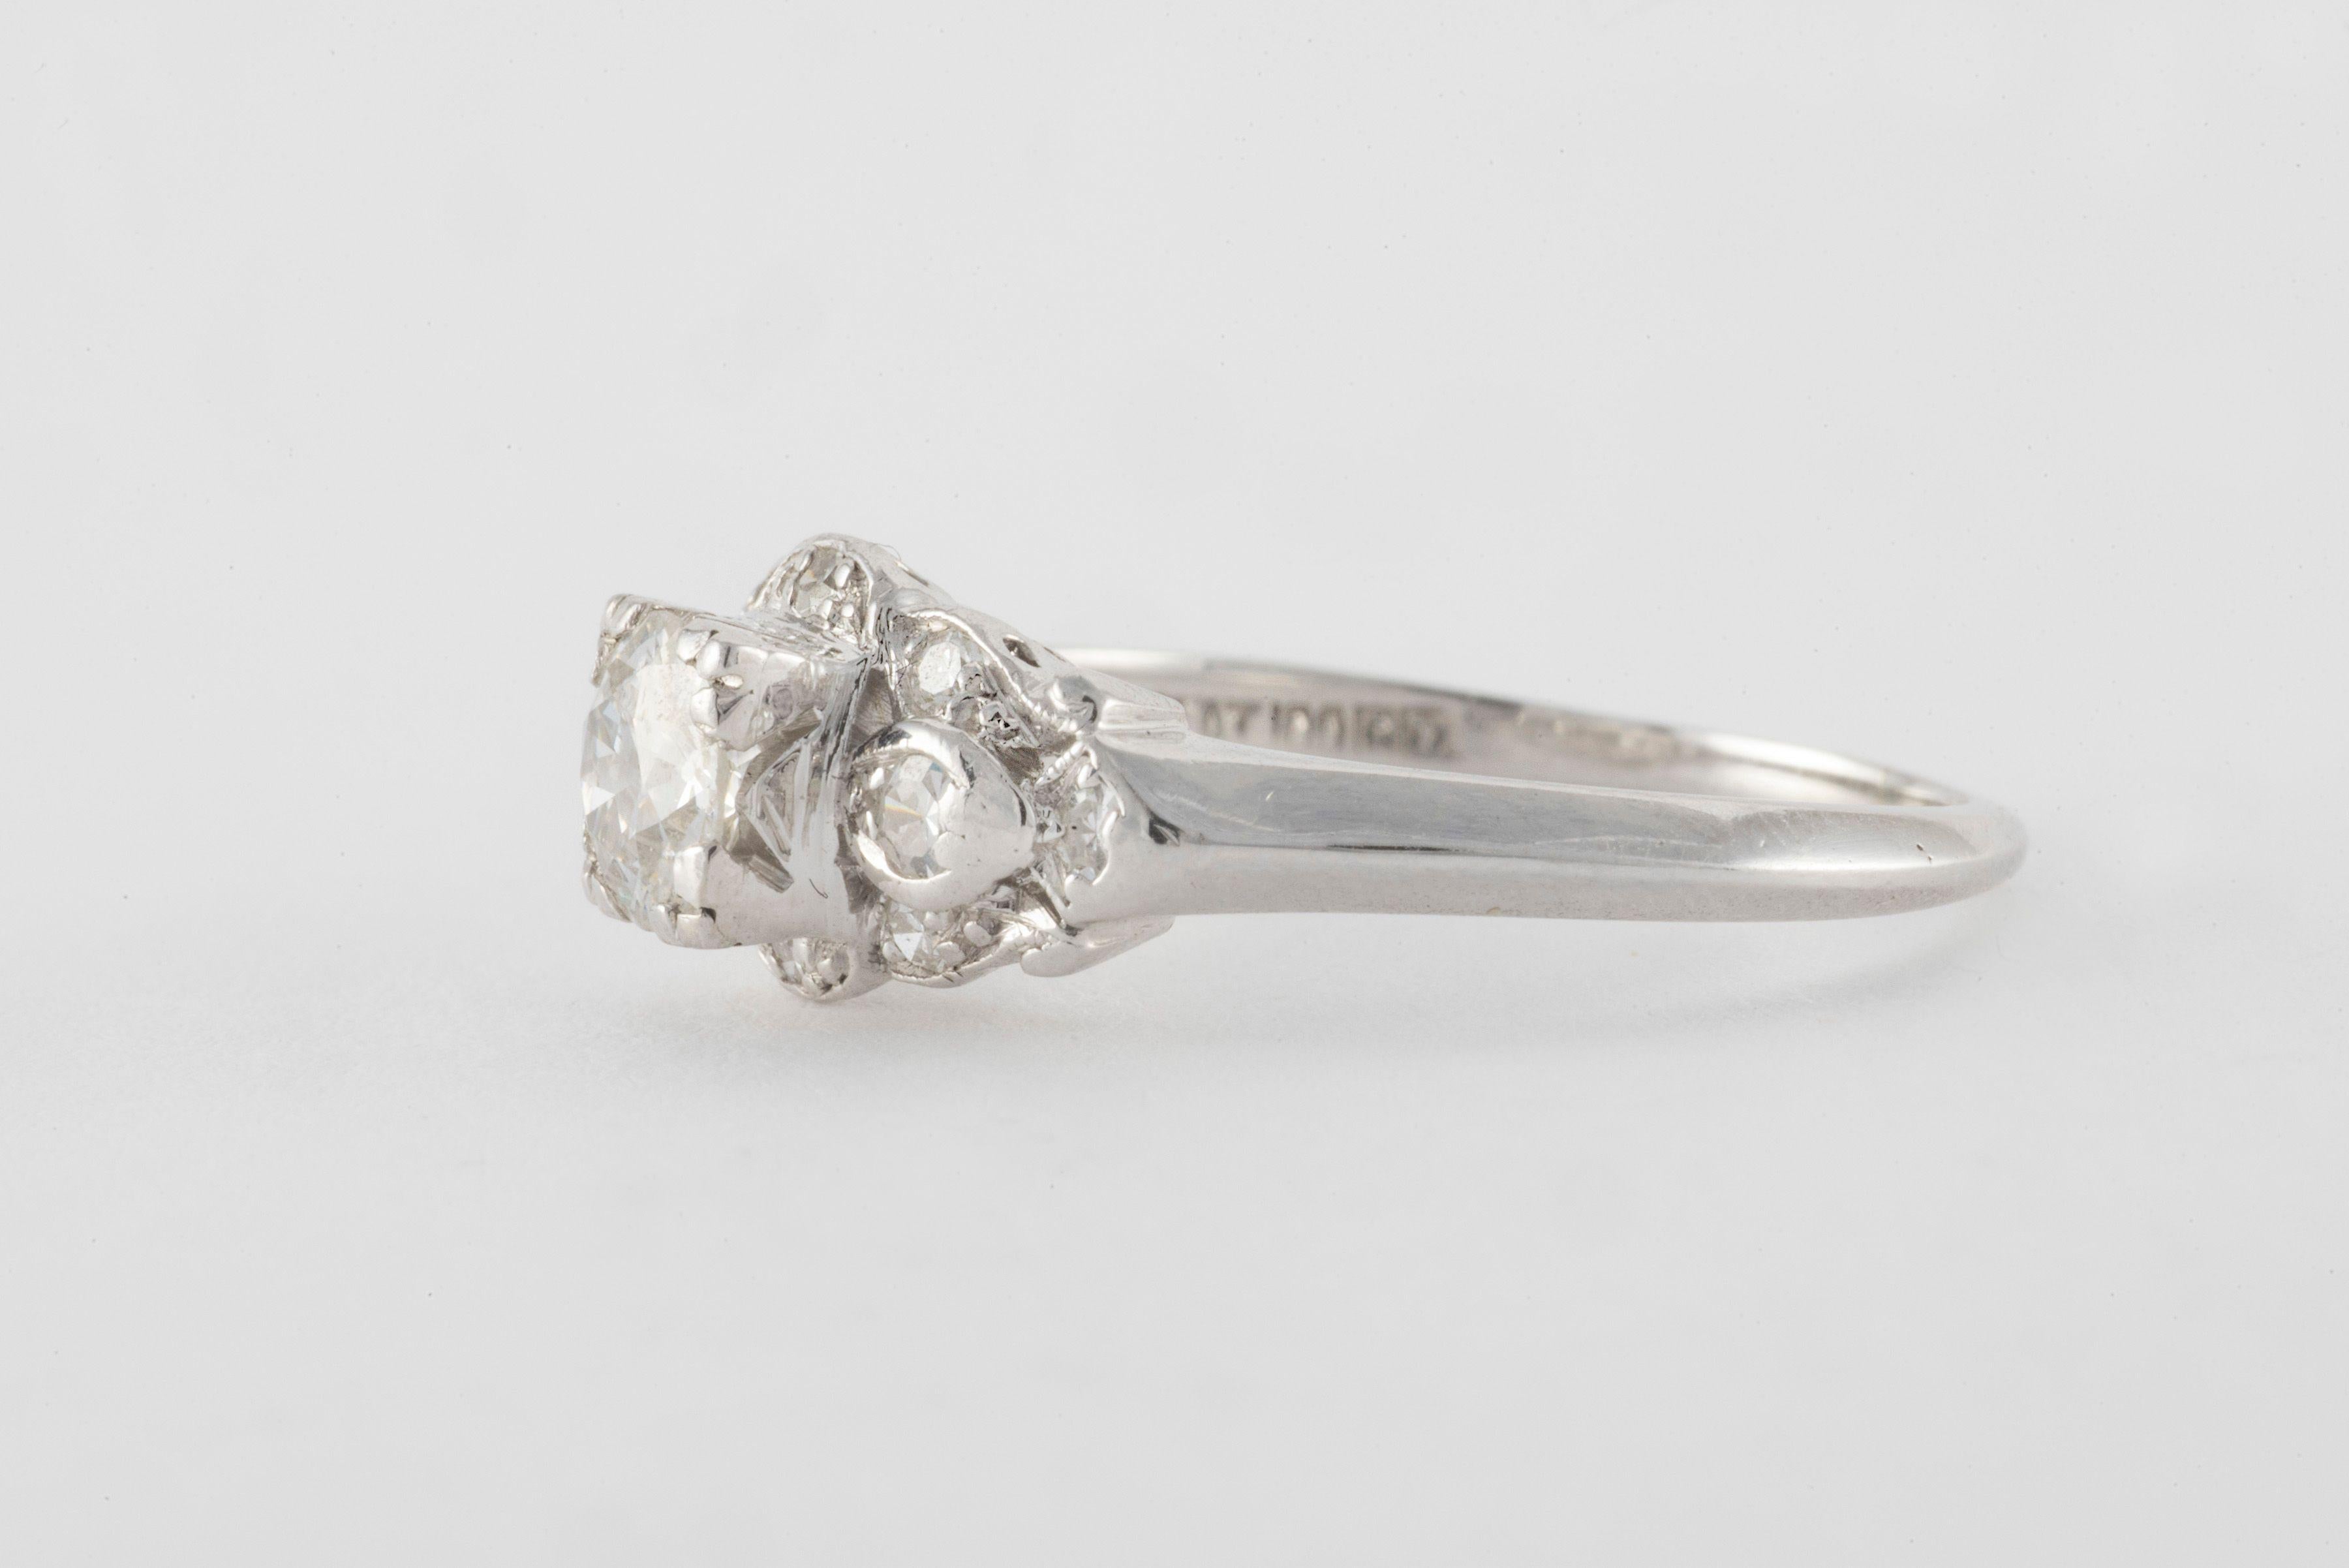 This glistening platinum band is designed around an Old European cut diamond center stone measuring approximately 0.67 carats, F color, SI1 clarity, 5.7 x 3mm and framed by ten single cut diamonds totaling approximately 0.25 carats. 
